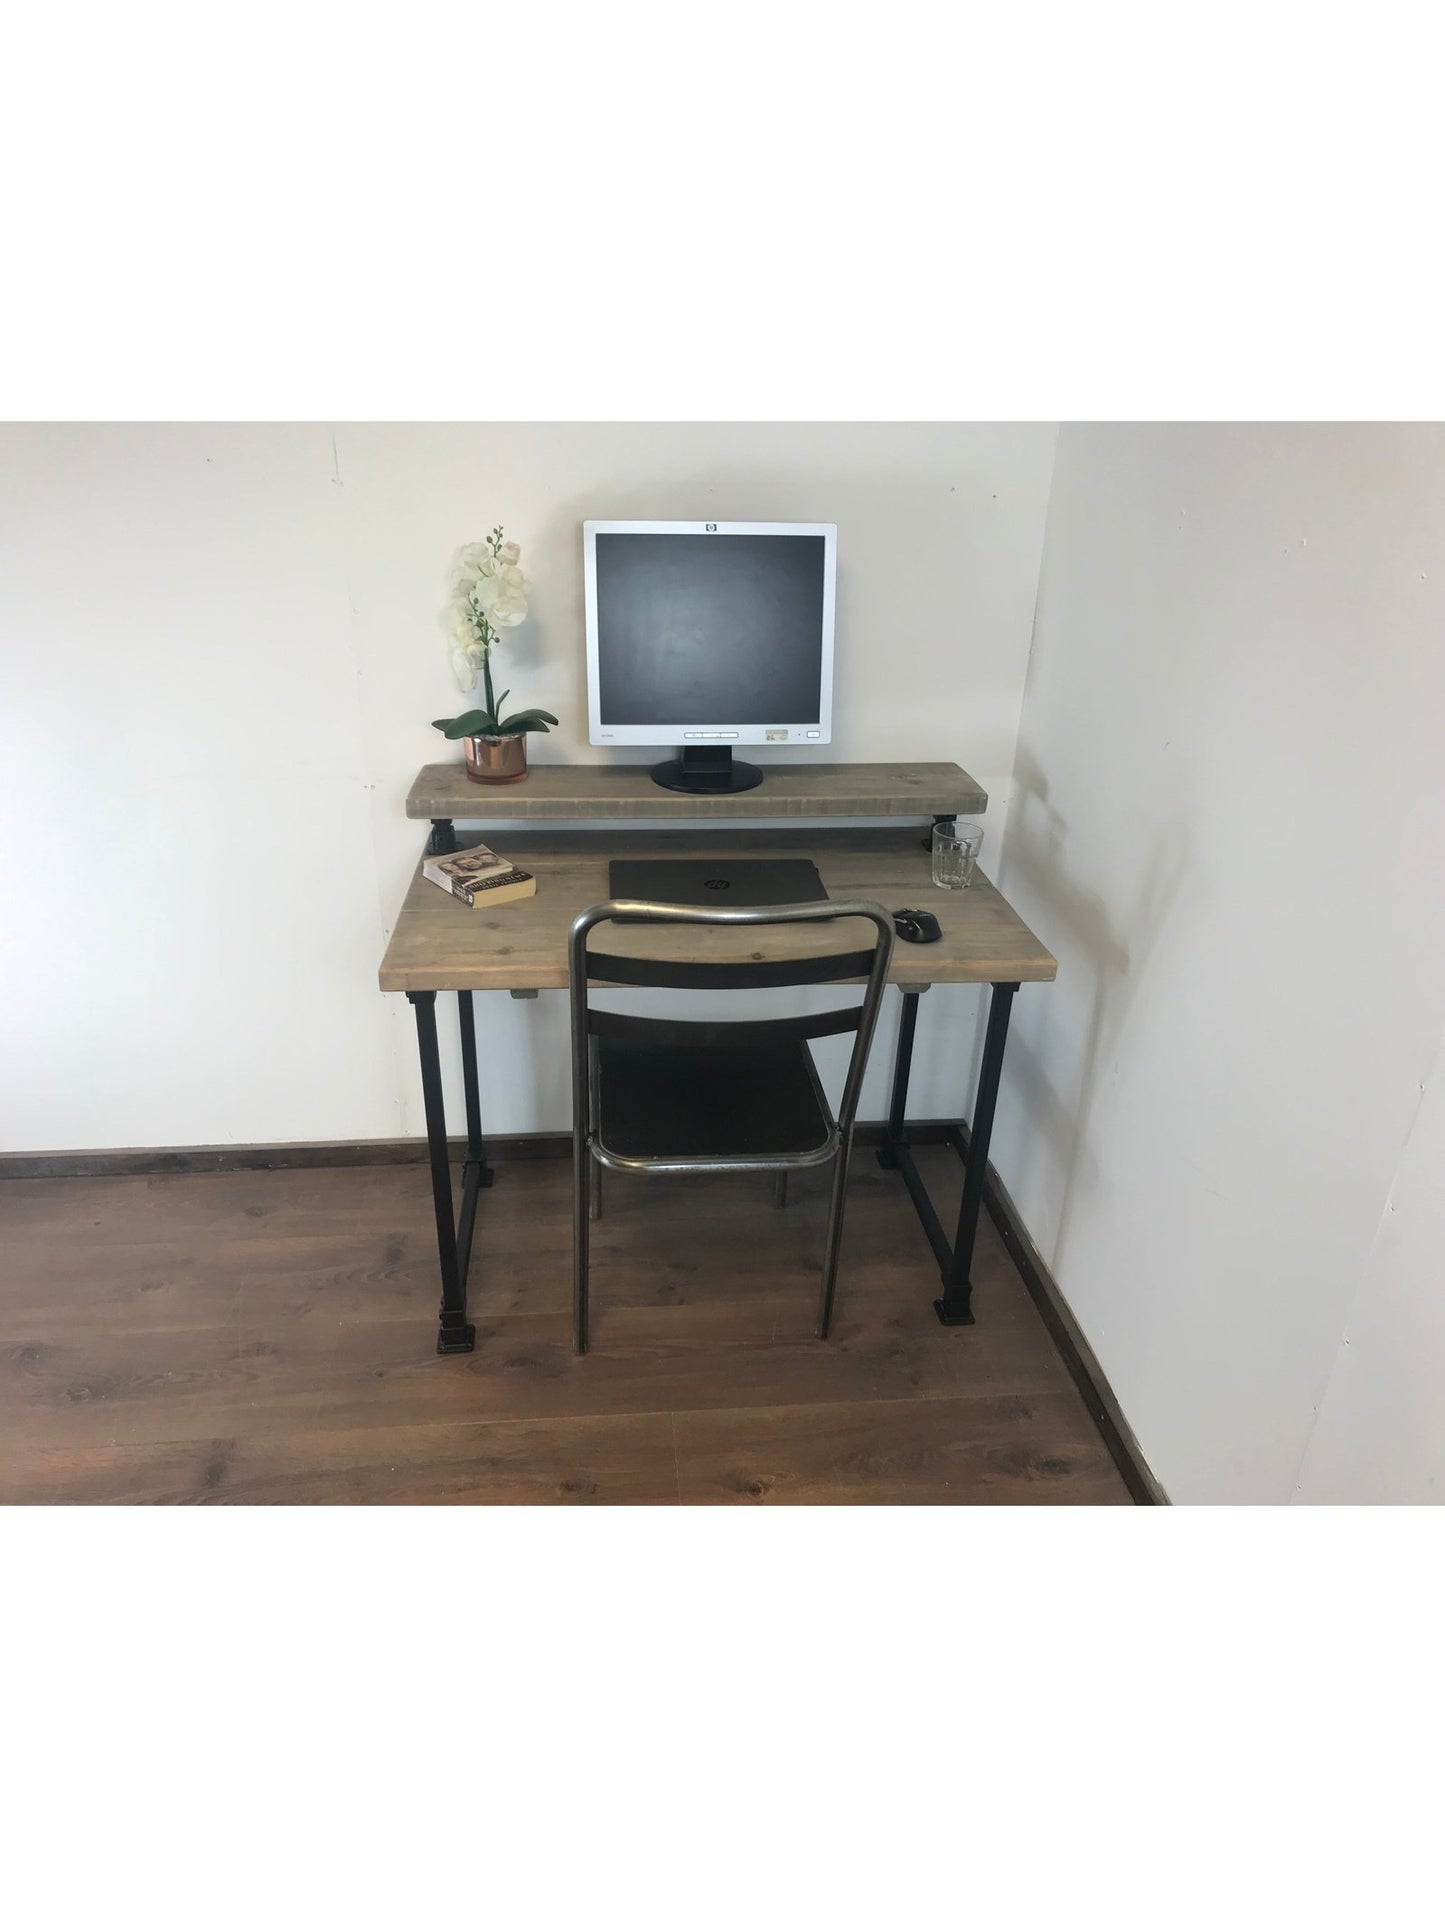 Home office desk with black square adjustable legs. with monitor shelf. 5 rustic wood colours. Industrial style. Simple Allan key installation, The Axlewood